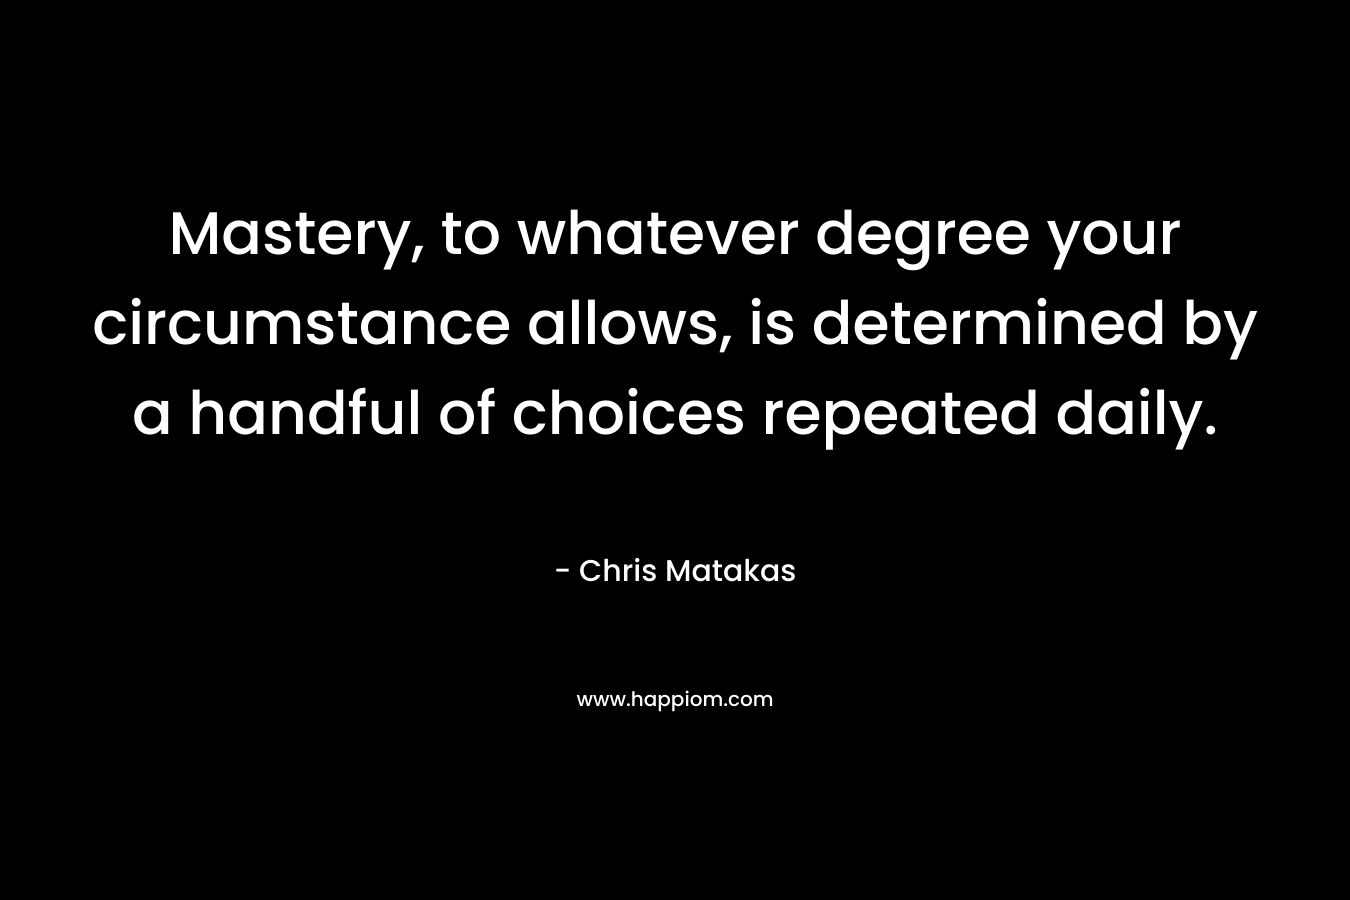 Mastery, to whatever degree your circumstance allows, is determined by a handful of choices repeated daily.